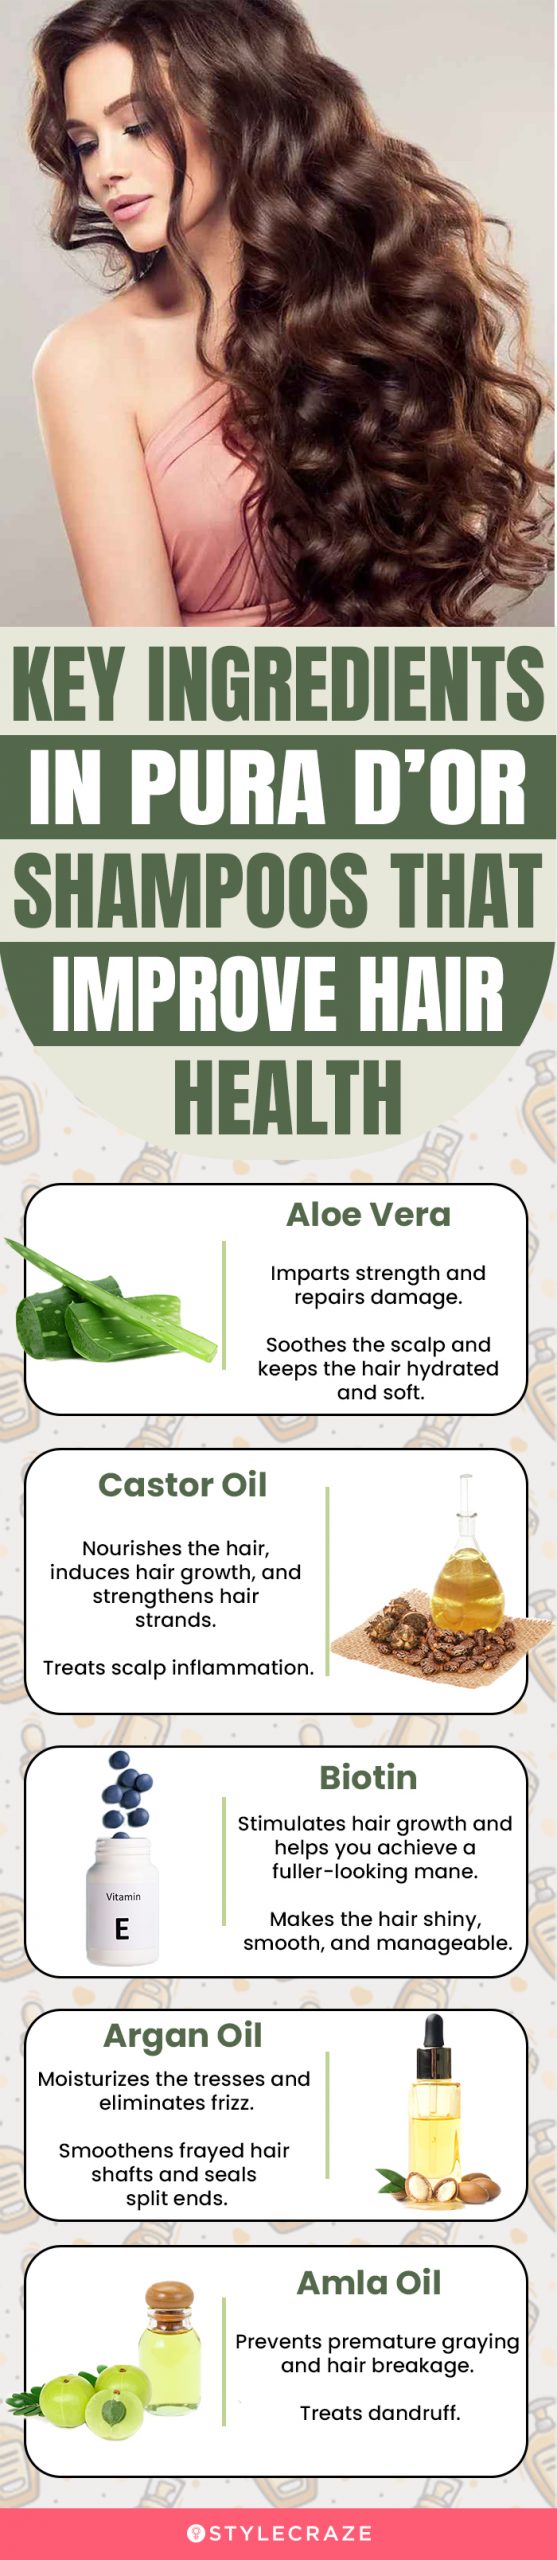 Key Ingredients In PURA D’OR Shampoo (infographic)